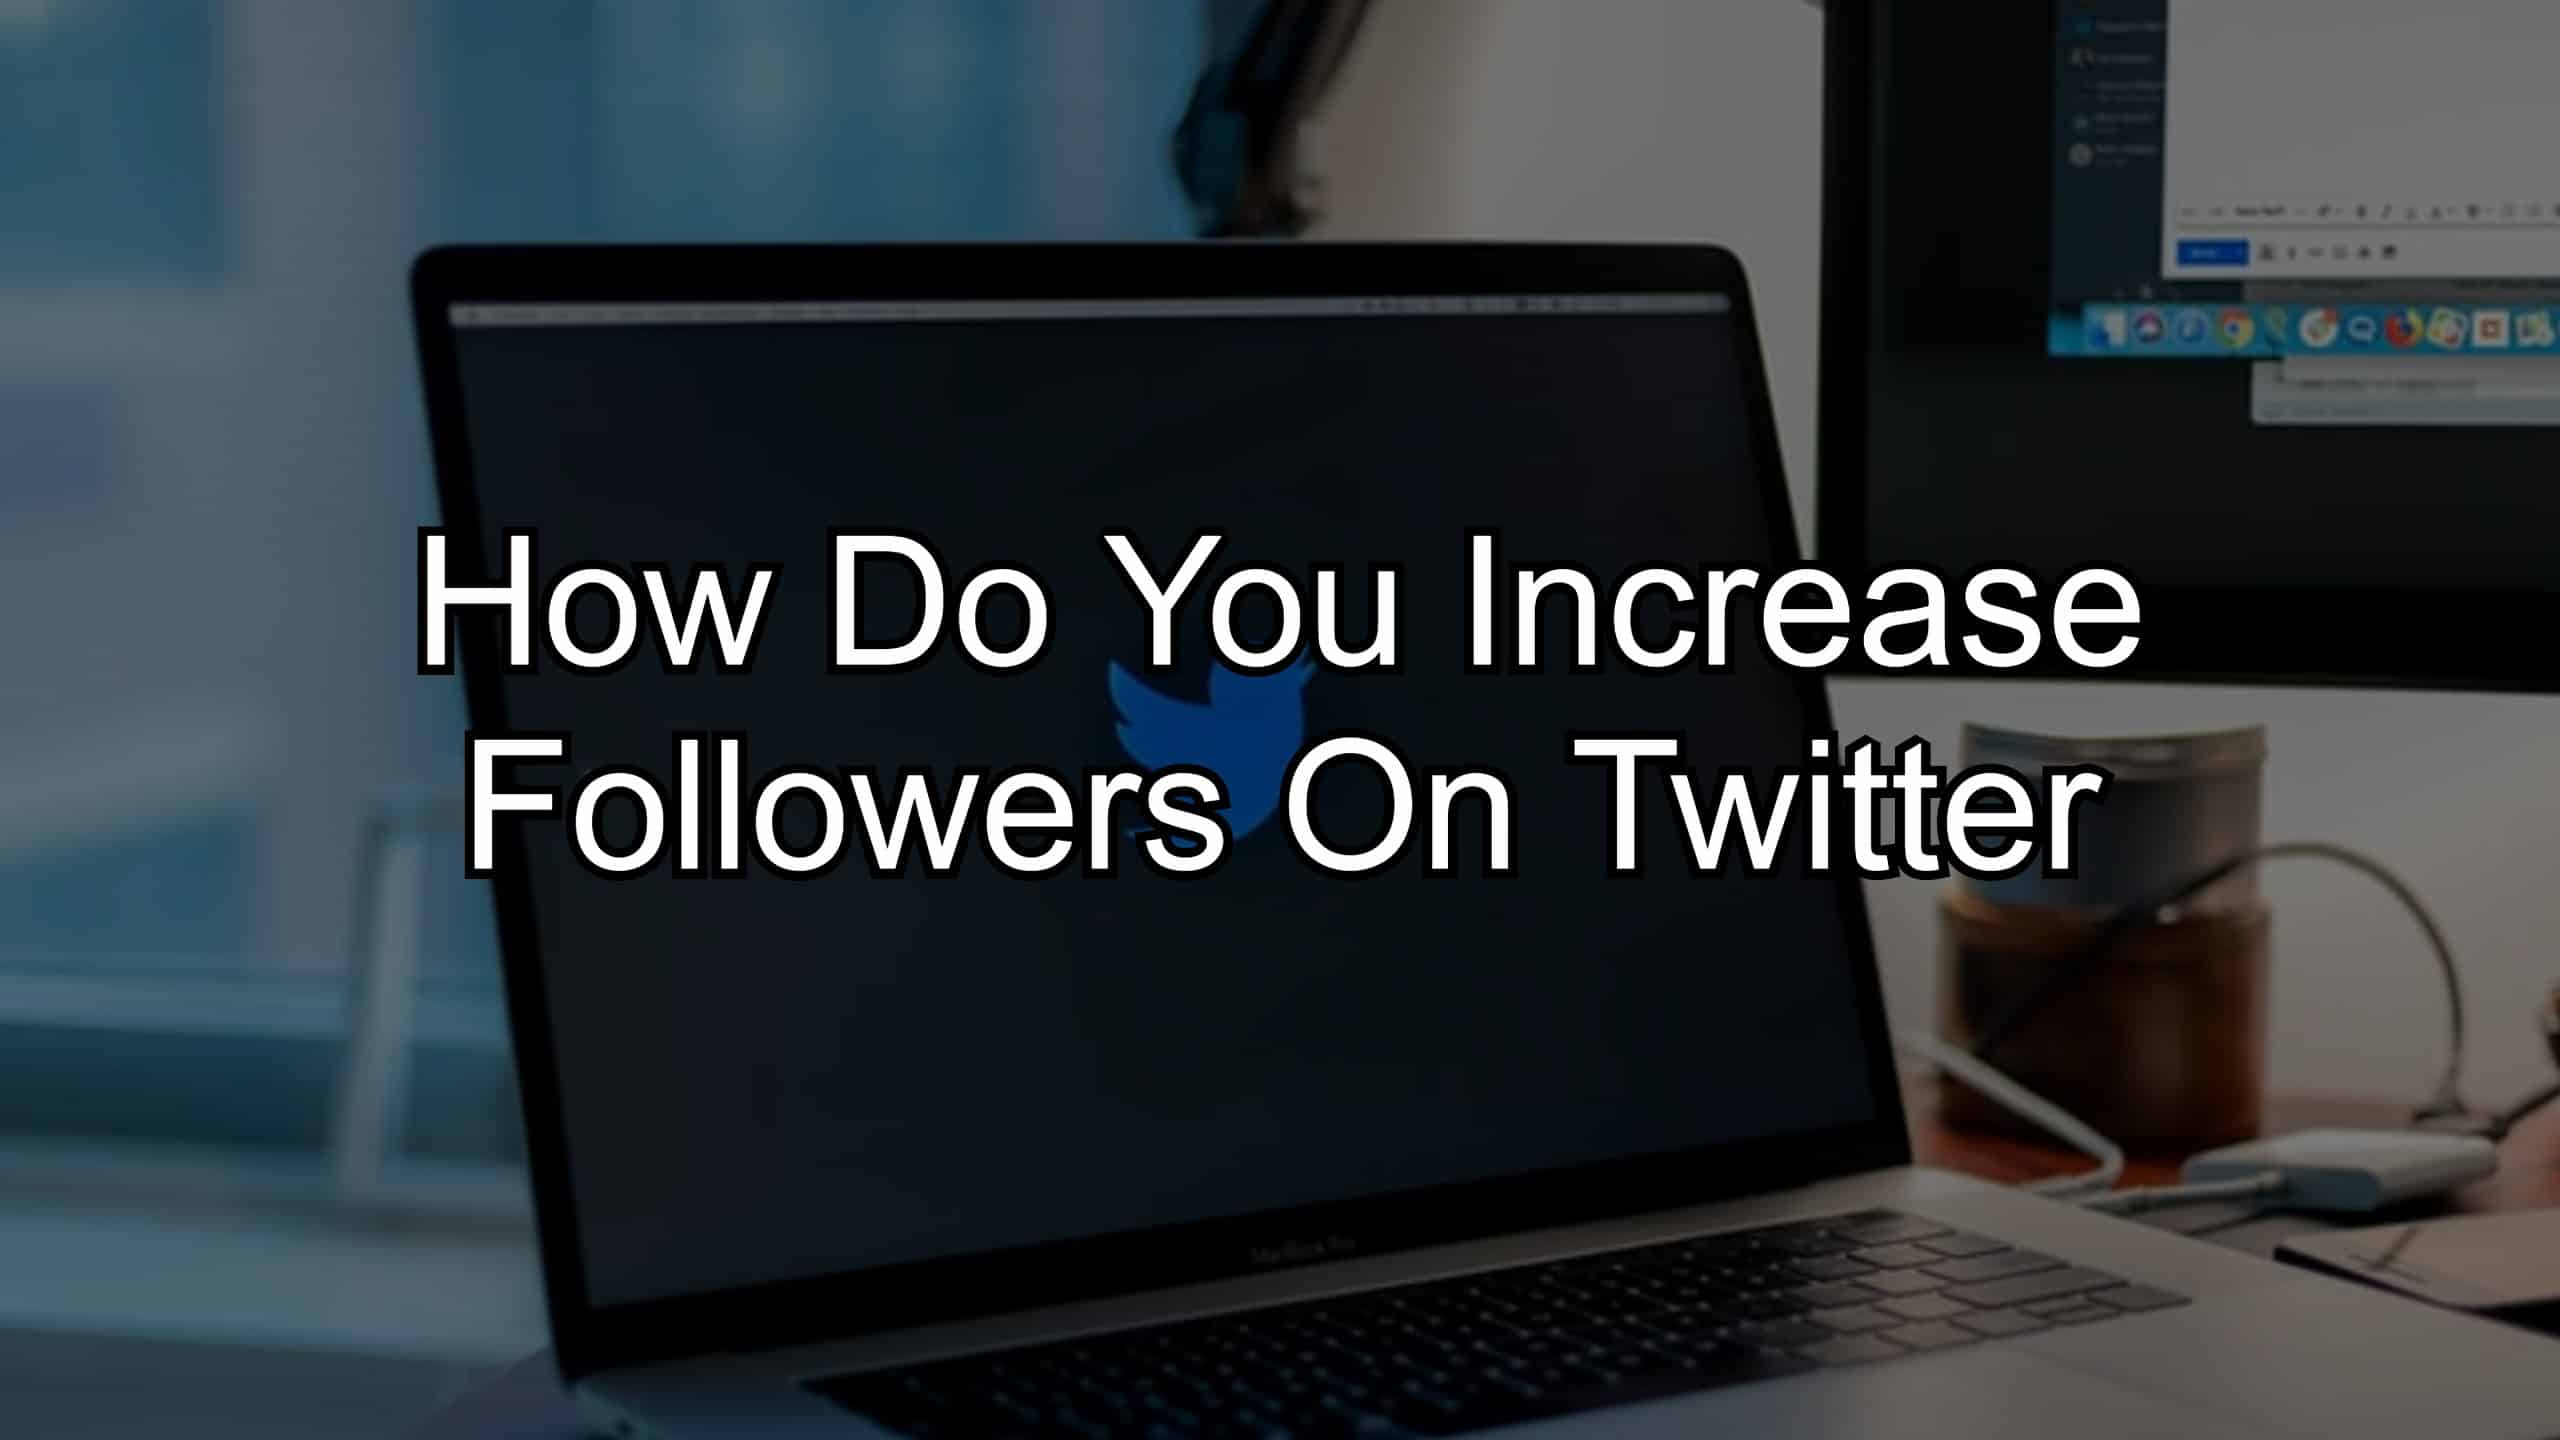 How Do You Increase Followers on Twitter?